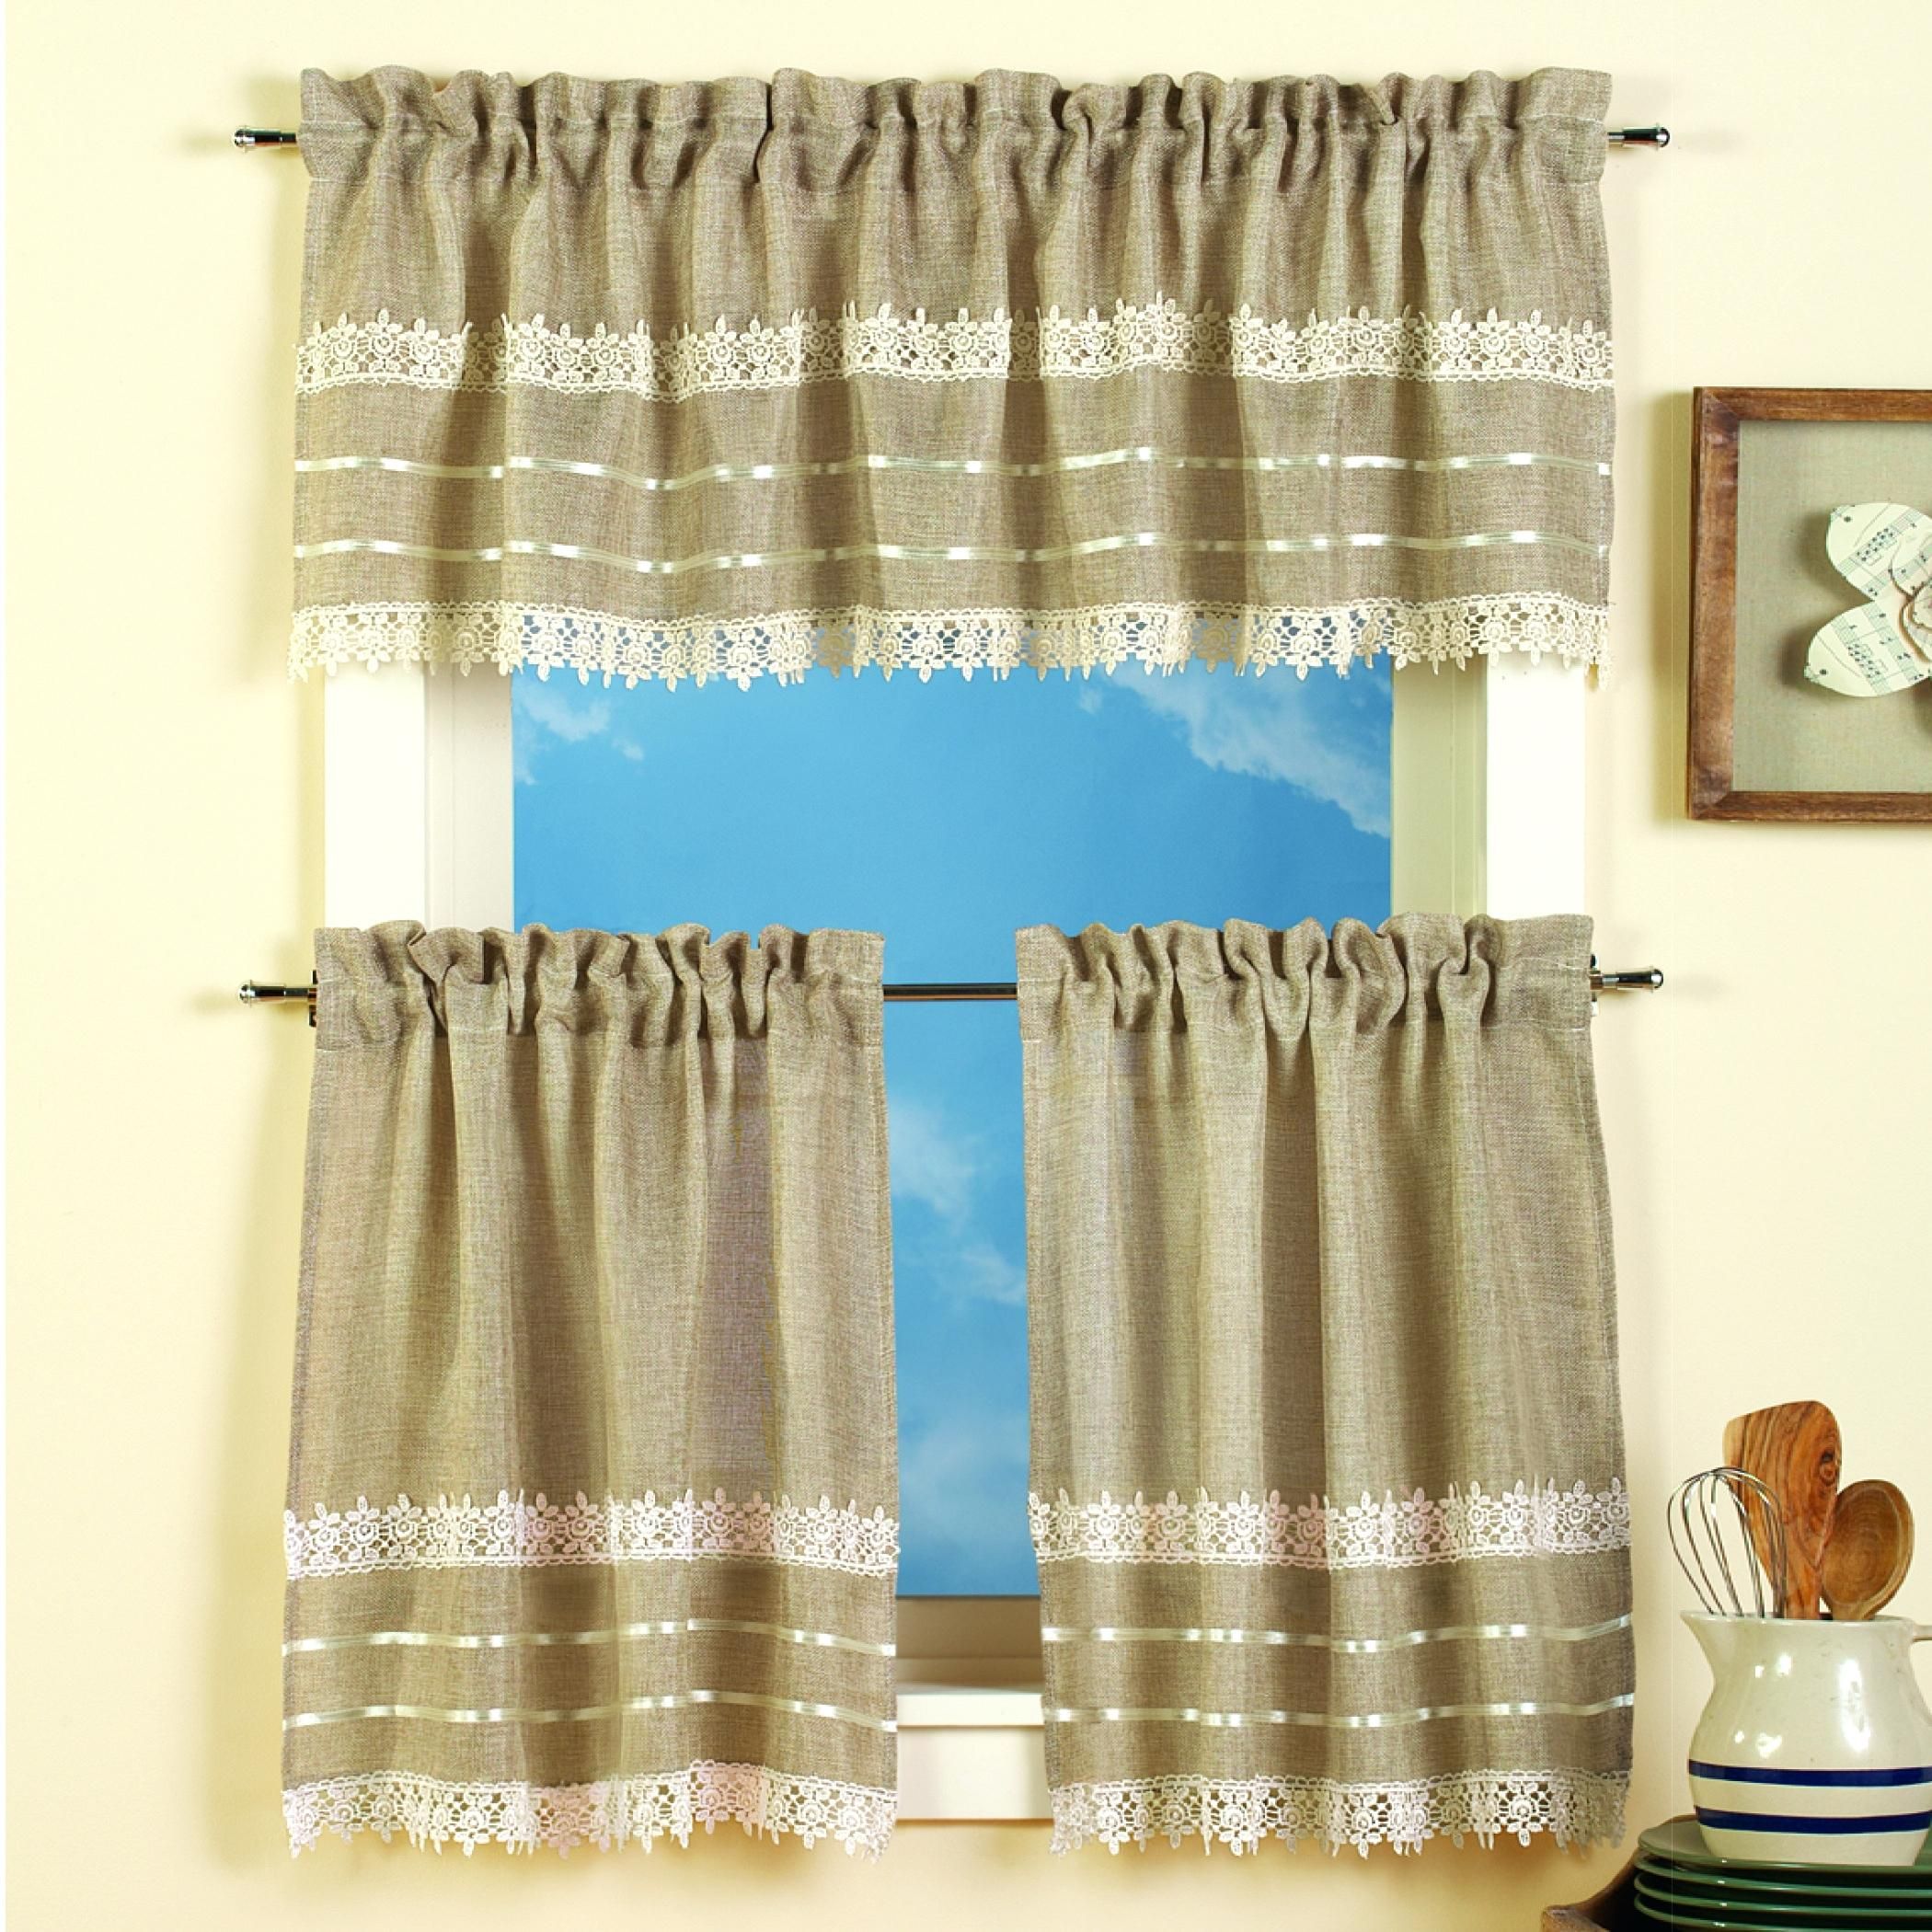 Curtain And Valance Set Throughout Live, Love, Laugh Window Curtain Tier Pair And Valance Sets (View 14 of 20)